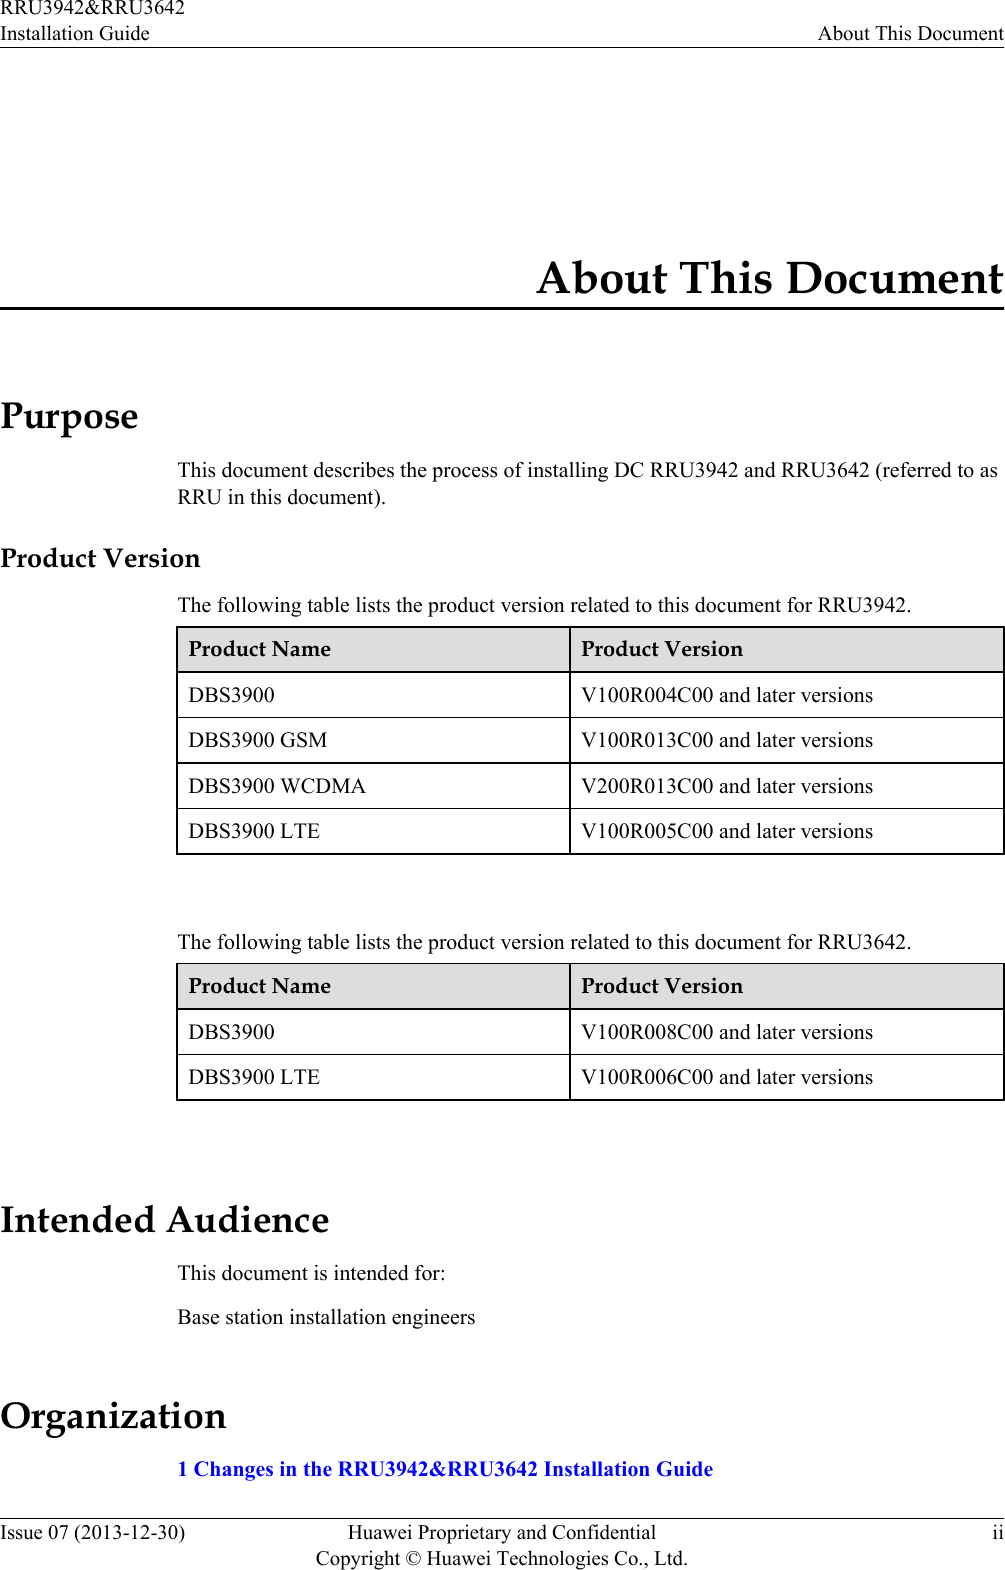 About This DocumentPurposeThis document describes the process of installing DC RRU3942 and RRU3642 (referred to asRRU in this document).Product VersionThe following table lists the product version related to this document for RRU3942.Product Name Product VersionDBS3900 V100R004C00 and later versionsDBS3900 GSM V100R013C00 and later versionsDBS3900 WCDMA V200R013C00 and later versionsDBS3900 LTE V100R005C00 and later versions The following table lists the product version related to this document for RRU3642.Product Name Product VersionDBS3900 V100R008C00 and later versionsDBS3900 LTE V100R006C00 and later versions Intended AudienceThis document is intended for:Base station installation engineersOrganization1 Changes in the RRU3942&amp;RRU3642 Installation GuideRRU3942&amp;RRU3642Installation Guide About This DocumentIssue 07 (2013-12-30) Huawei Proprietary and ConfidentialCopyright © Huawei Technologies Co., Ltd.ii